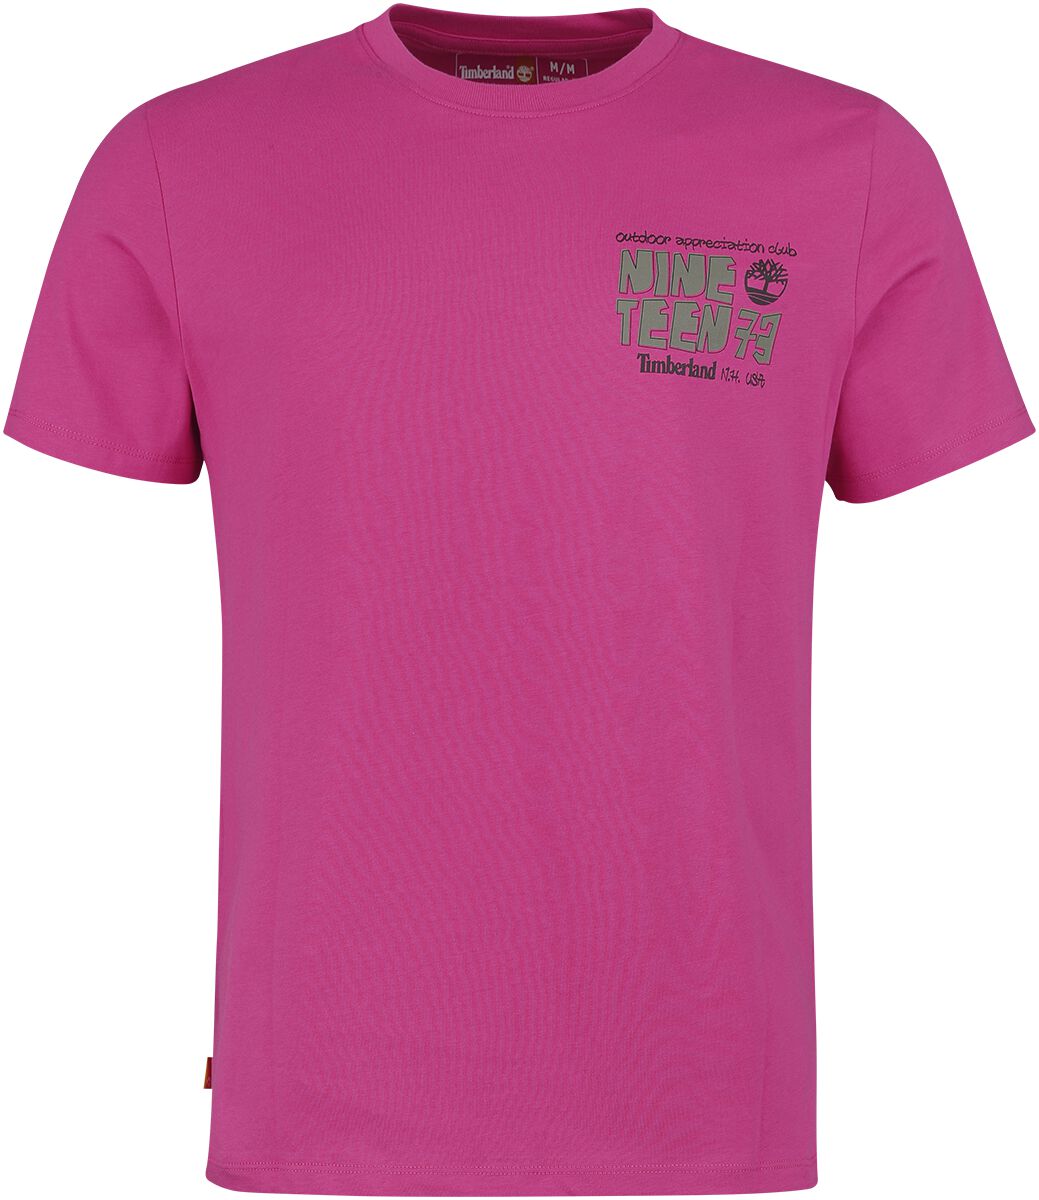 Image of T-Shirt di Timberland - Outdoor back graphic t-shirt - S a L - Uomo - rosa